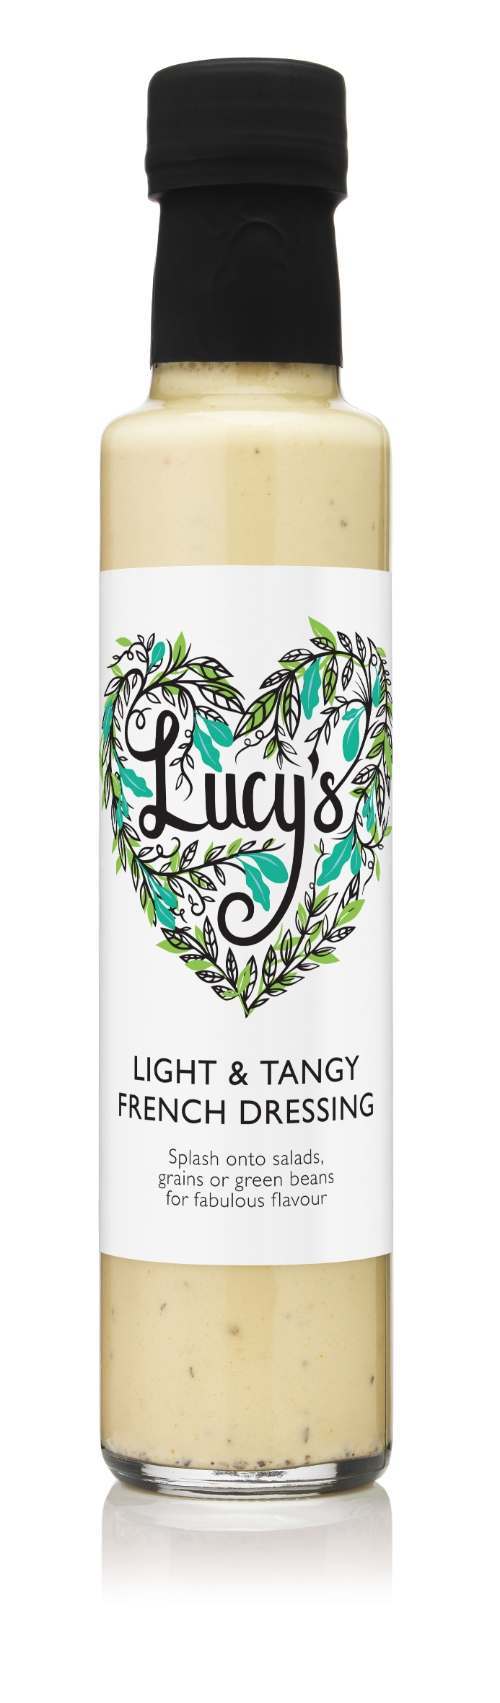 Lucys Dressings Light & Tangy French Dressing 250ml